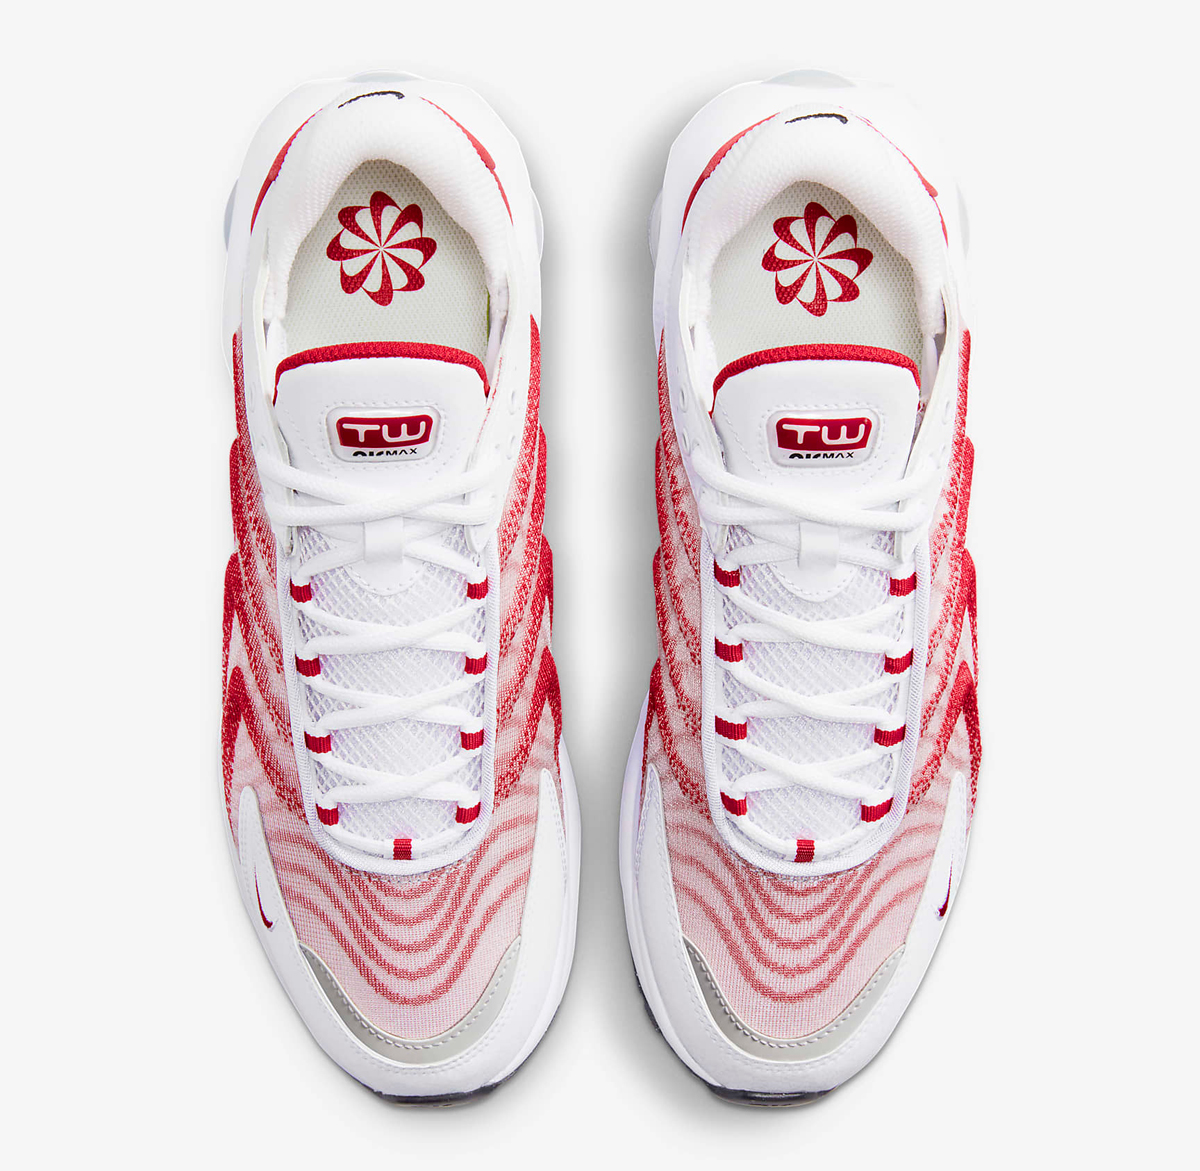 Nike-Air-Max-TW-White-University-Red-Release-Date-4